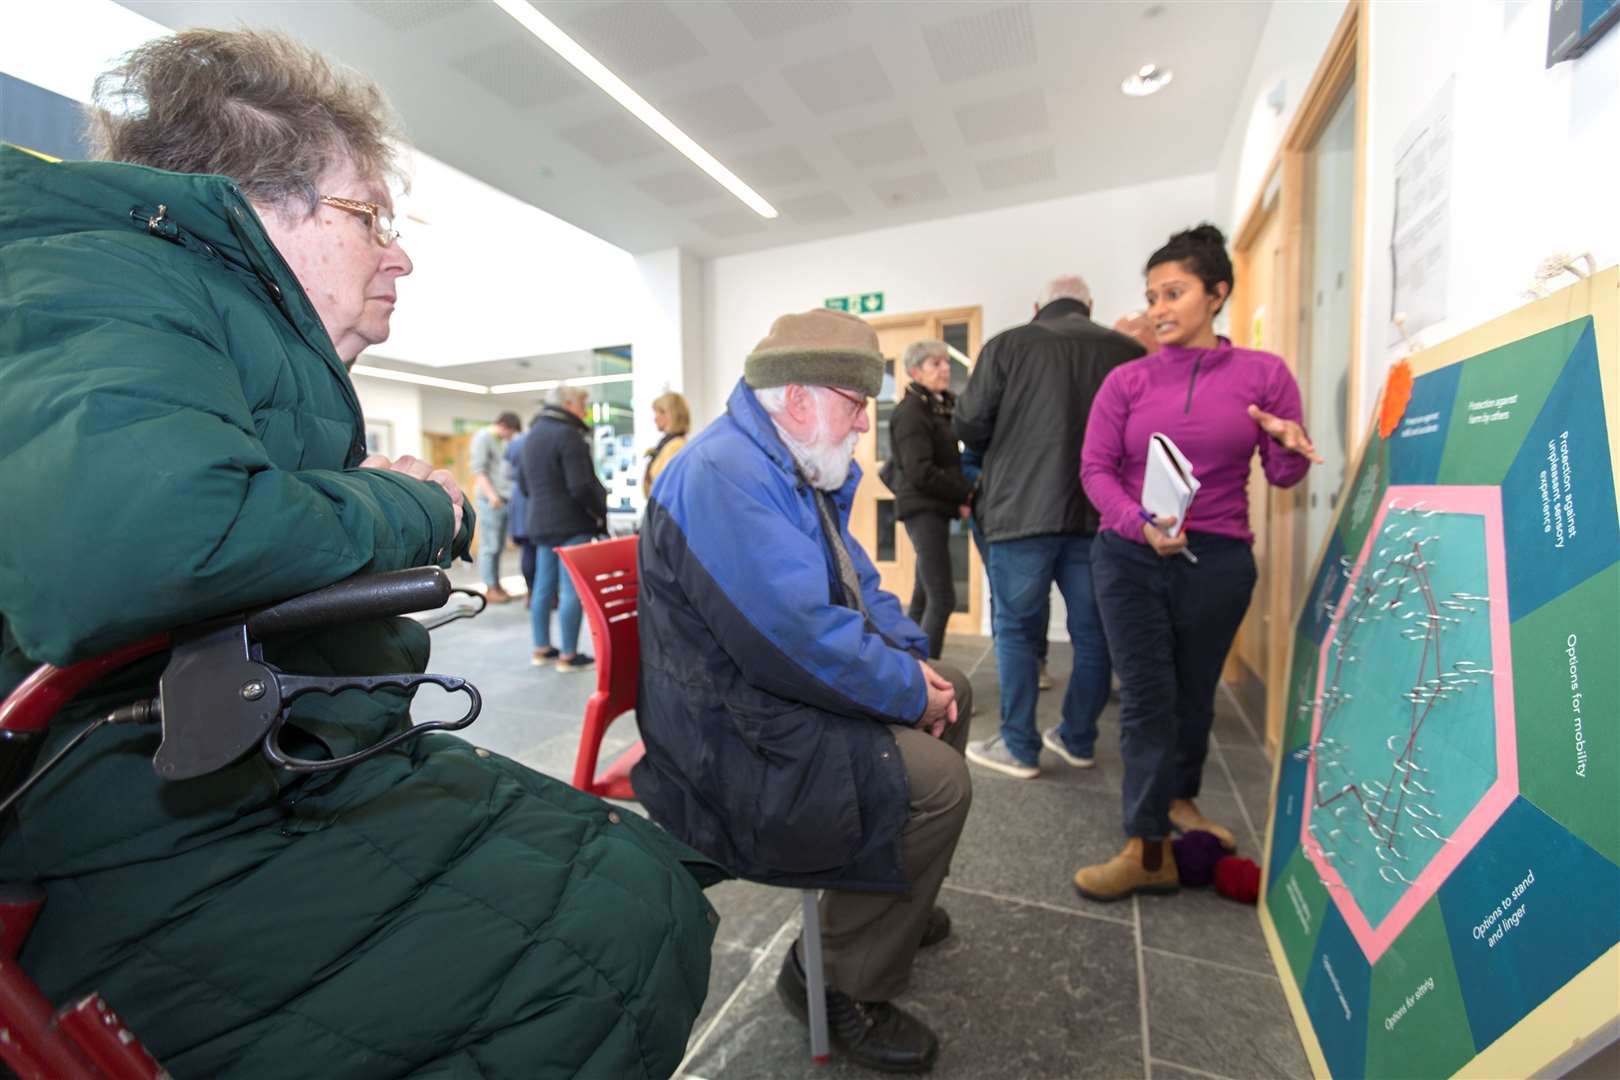 Wickers sharing their opinions with Sustrans' staff at a public event in 2019 before Covid hit. Picture: DGS